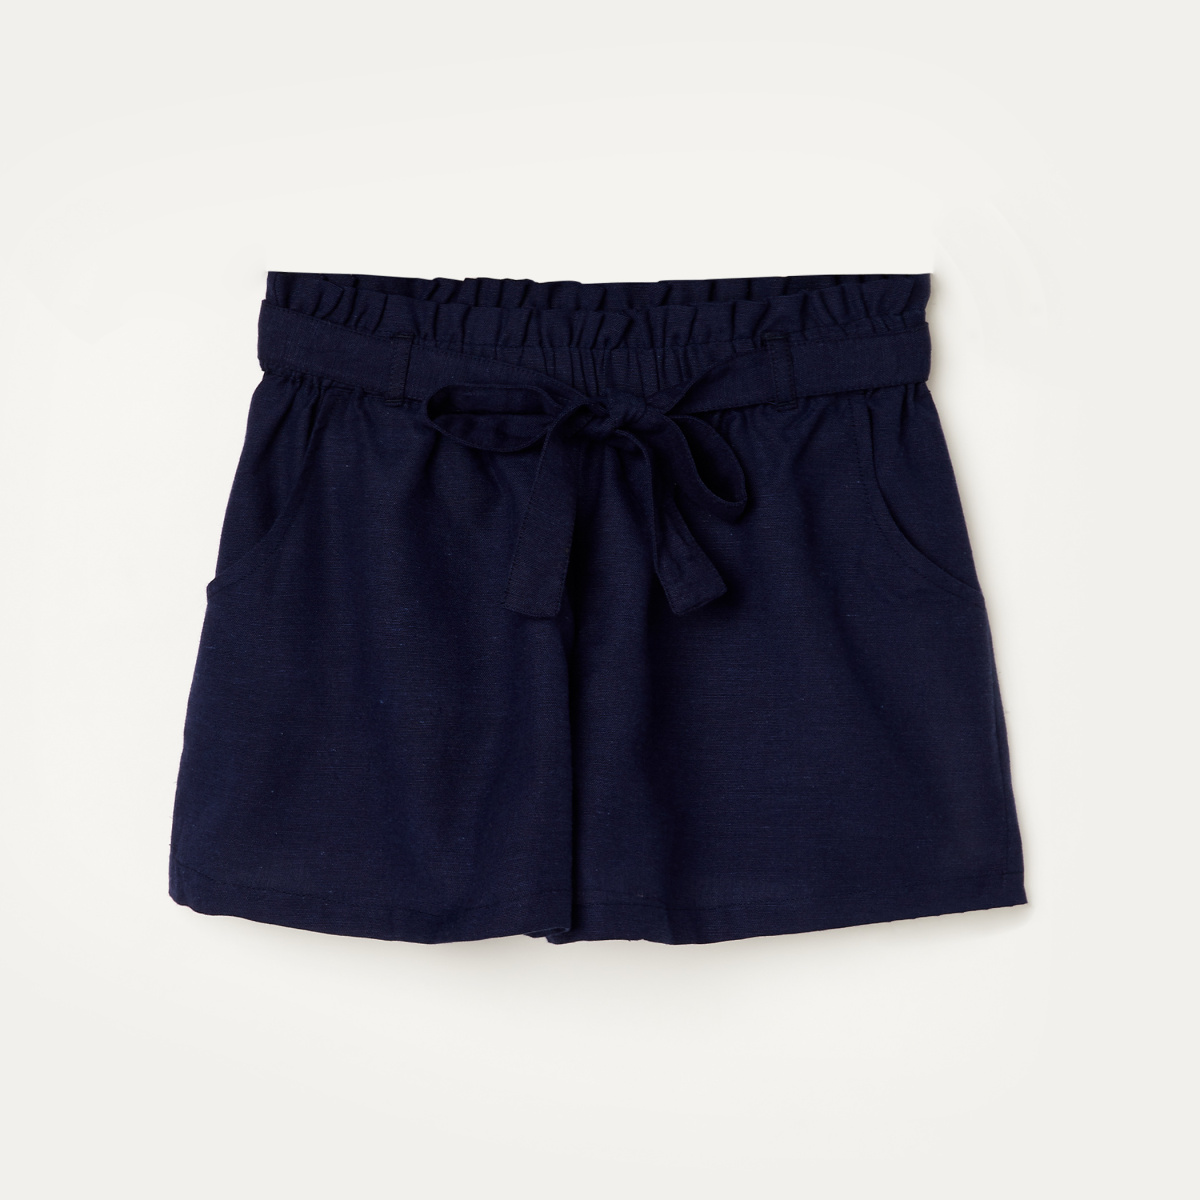 FAME FOREVER YOUNG Girls Solid Woven Elasticated Shorts